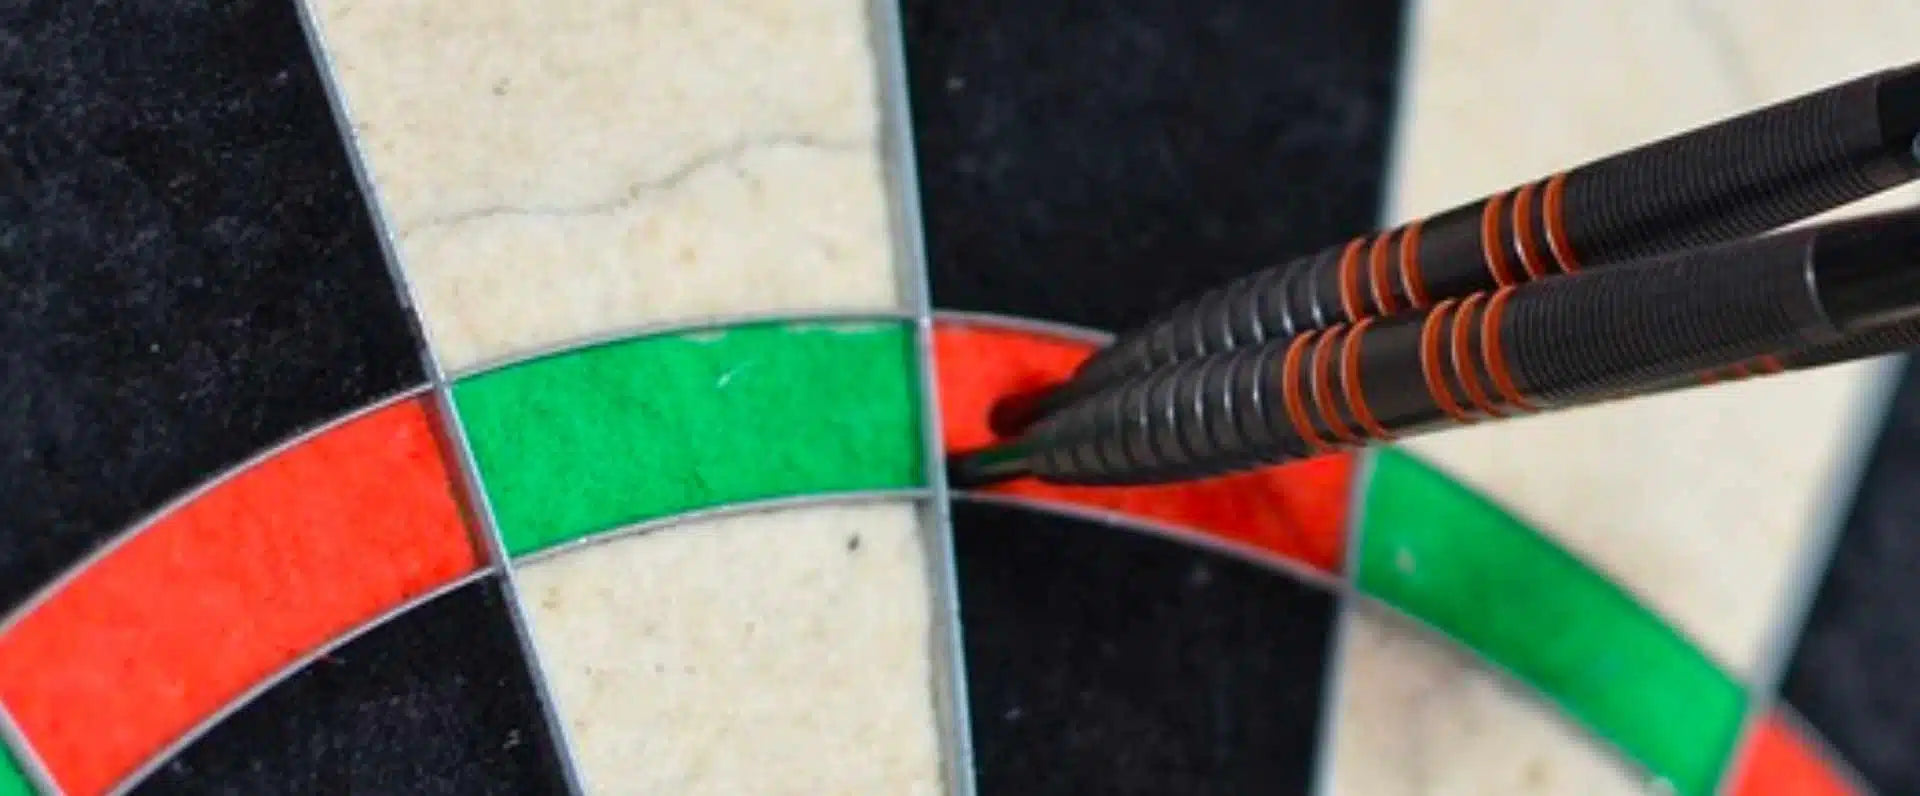 Dartboards Guide | Distances, Heights & Sizes | Net World Sports